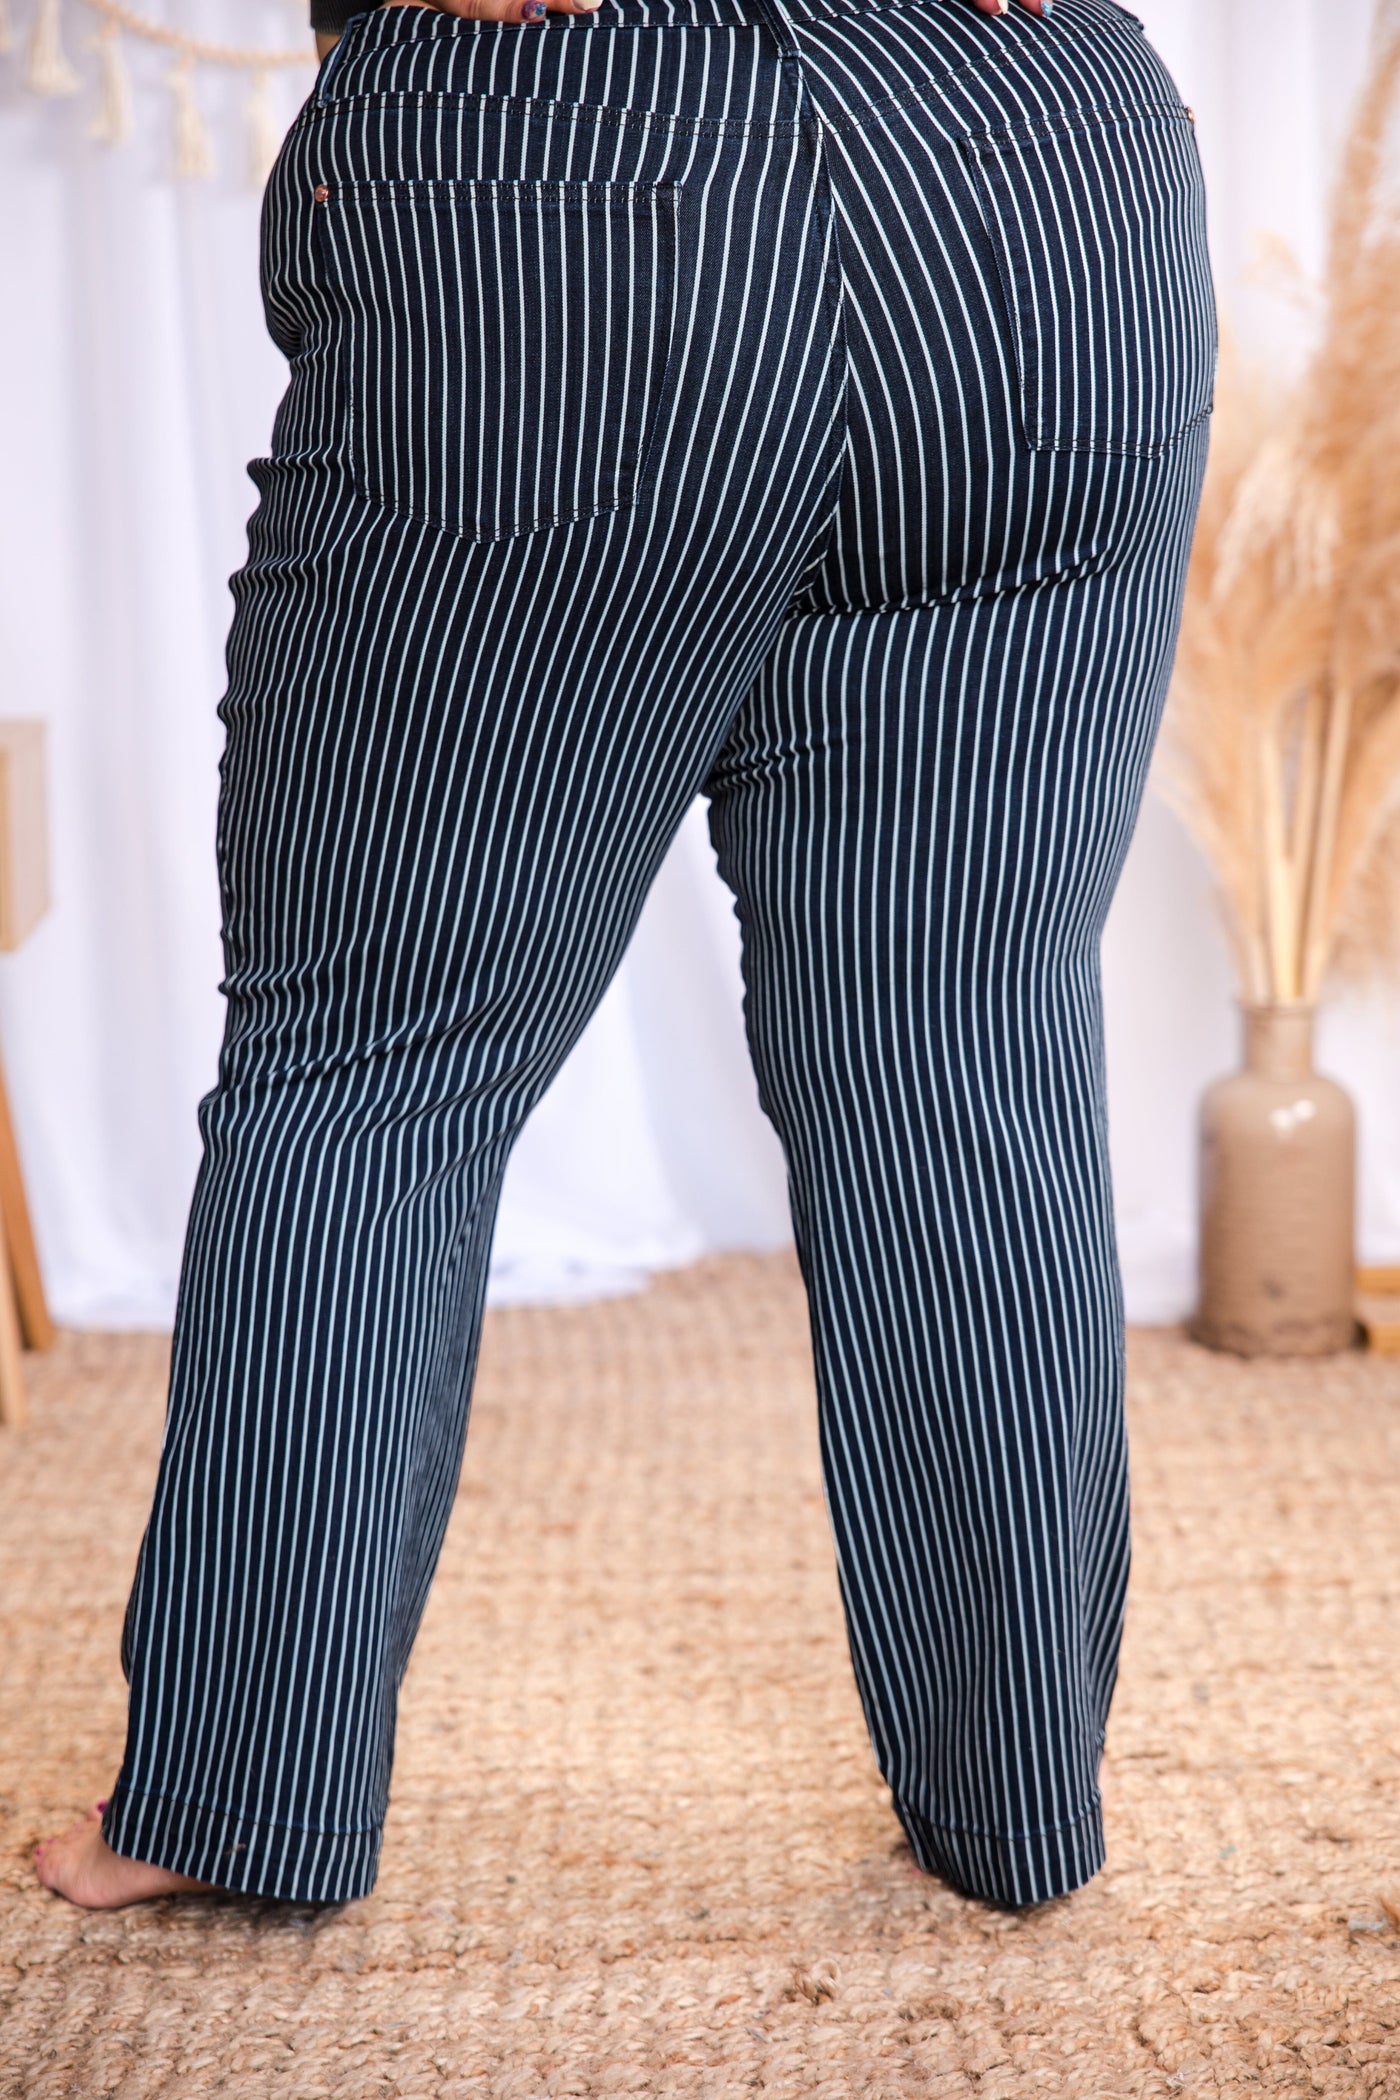 Pinstriped Diva - Tummy Control Judy Blues Giftmas JB Boutique Simplified 